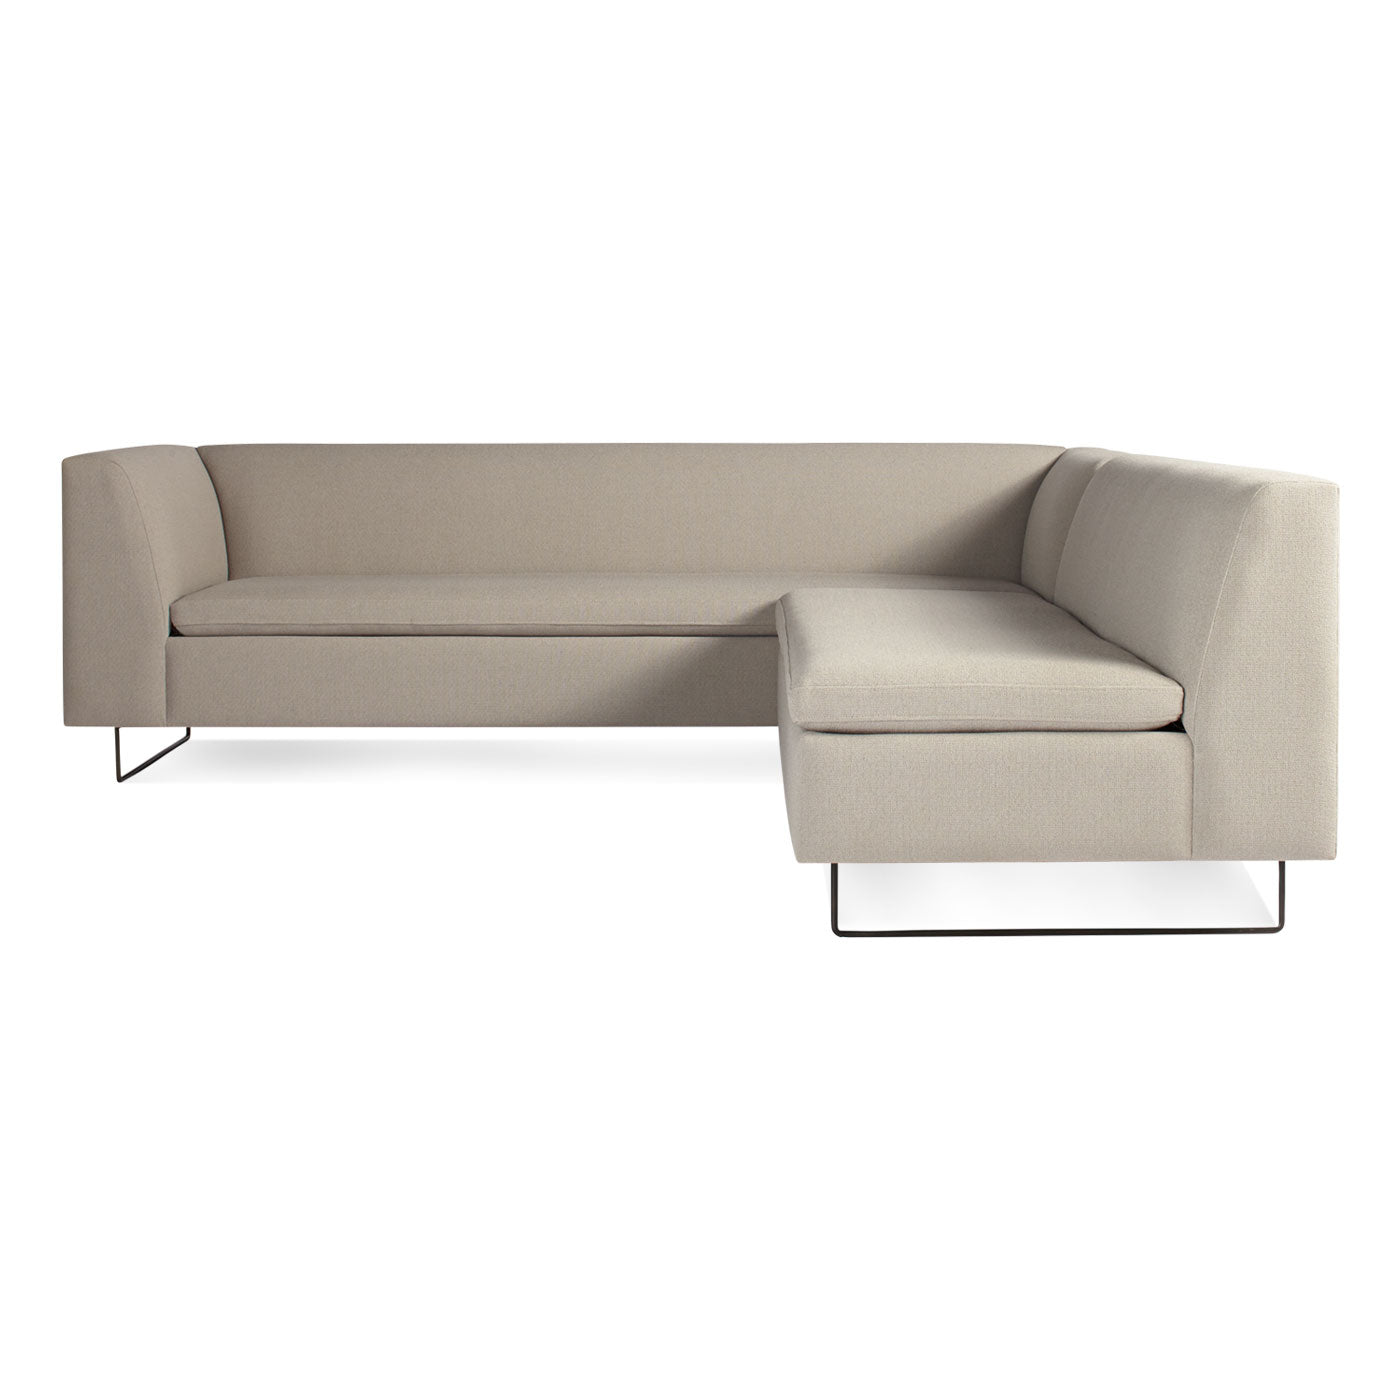 Bonnie and Clyde 96" Sectional Sofa